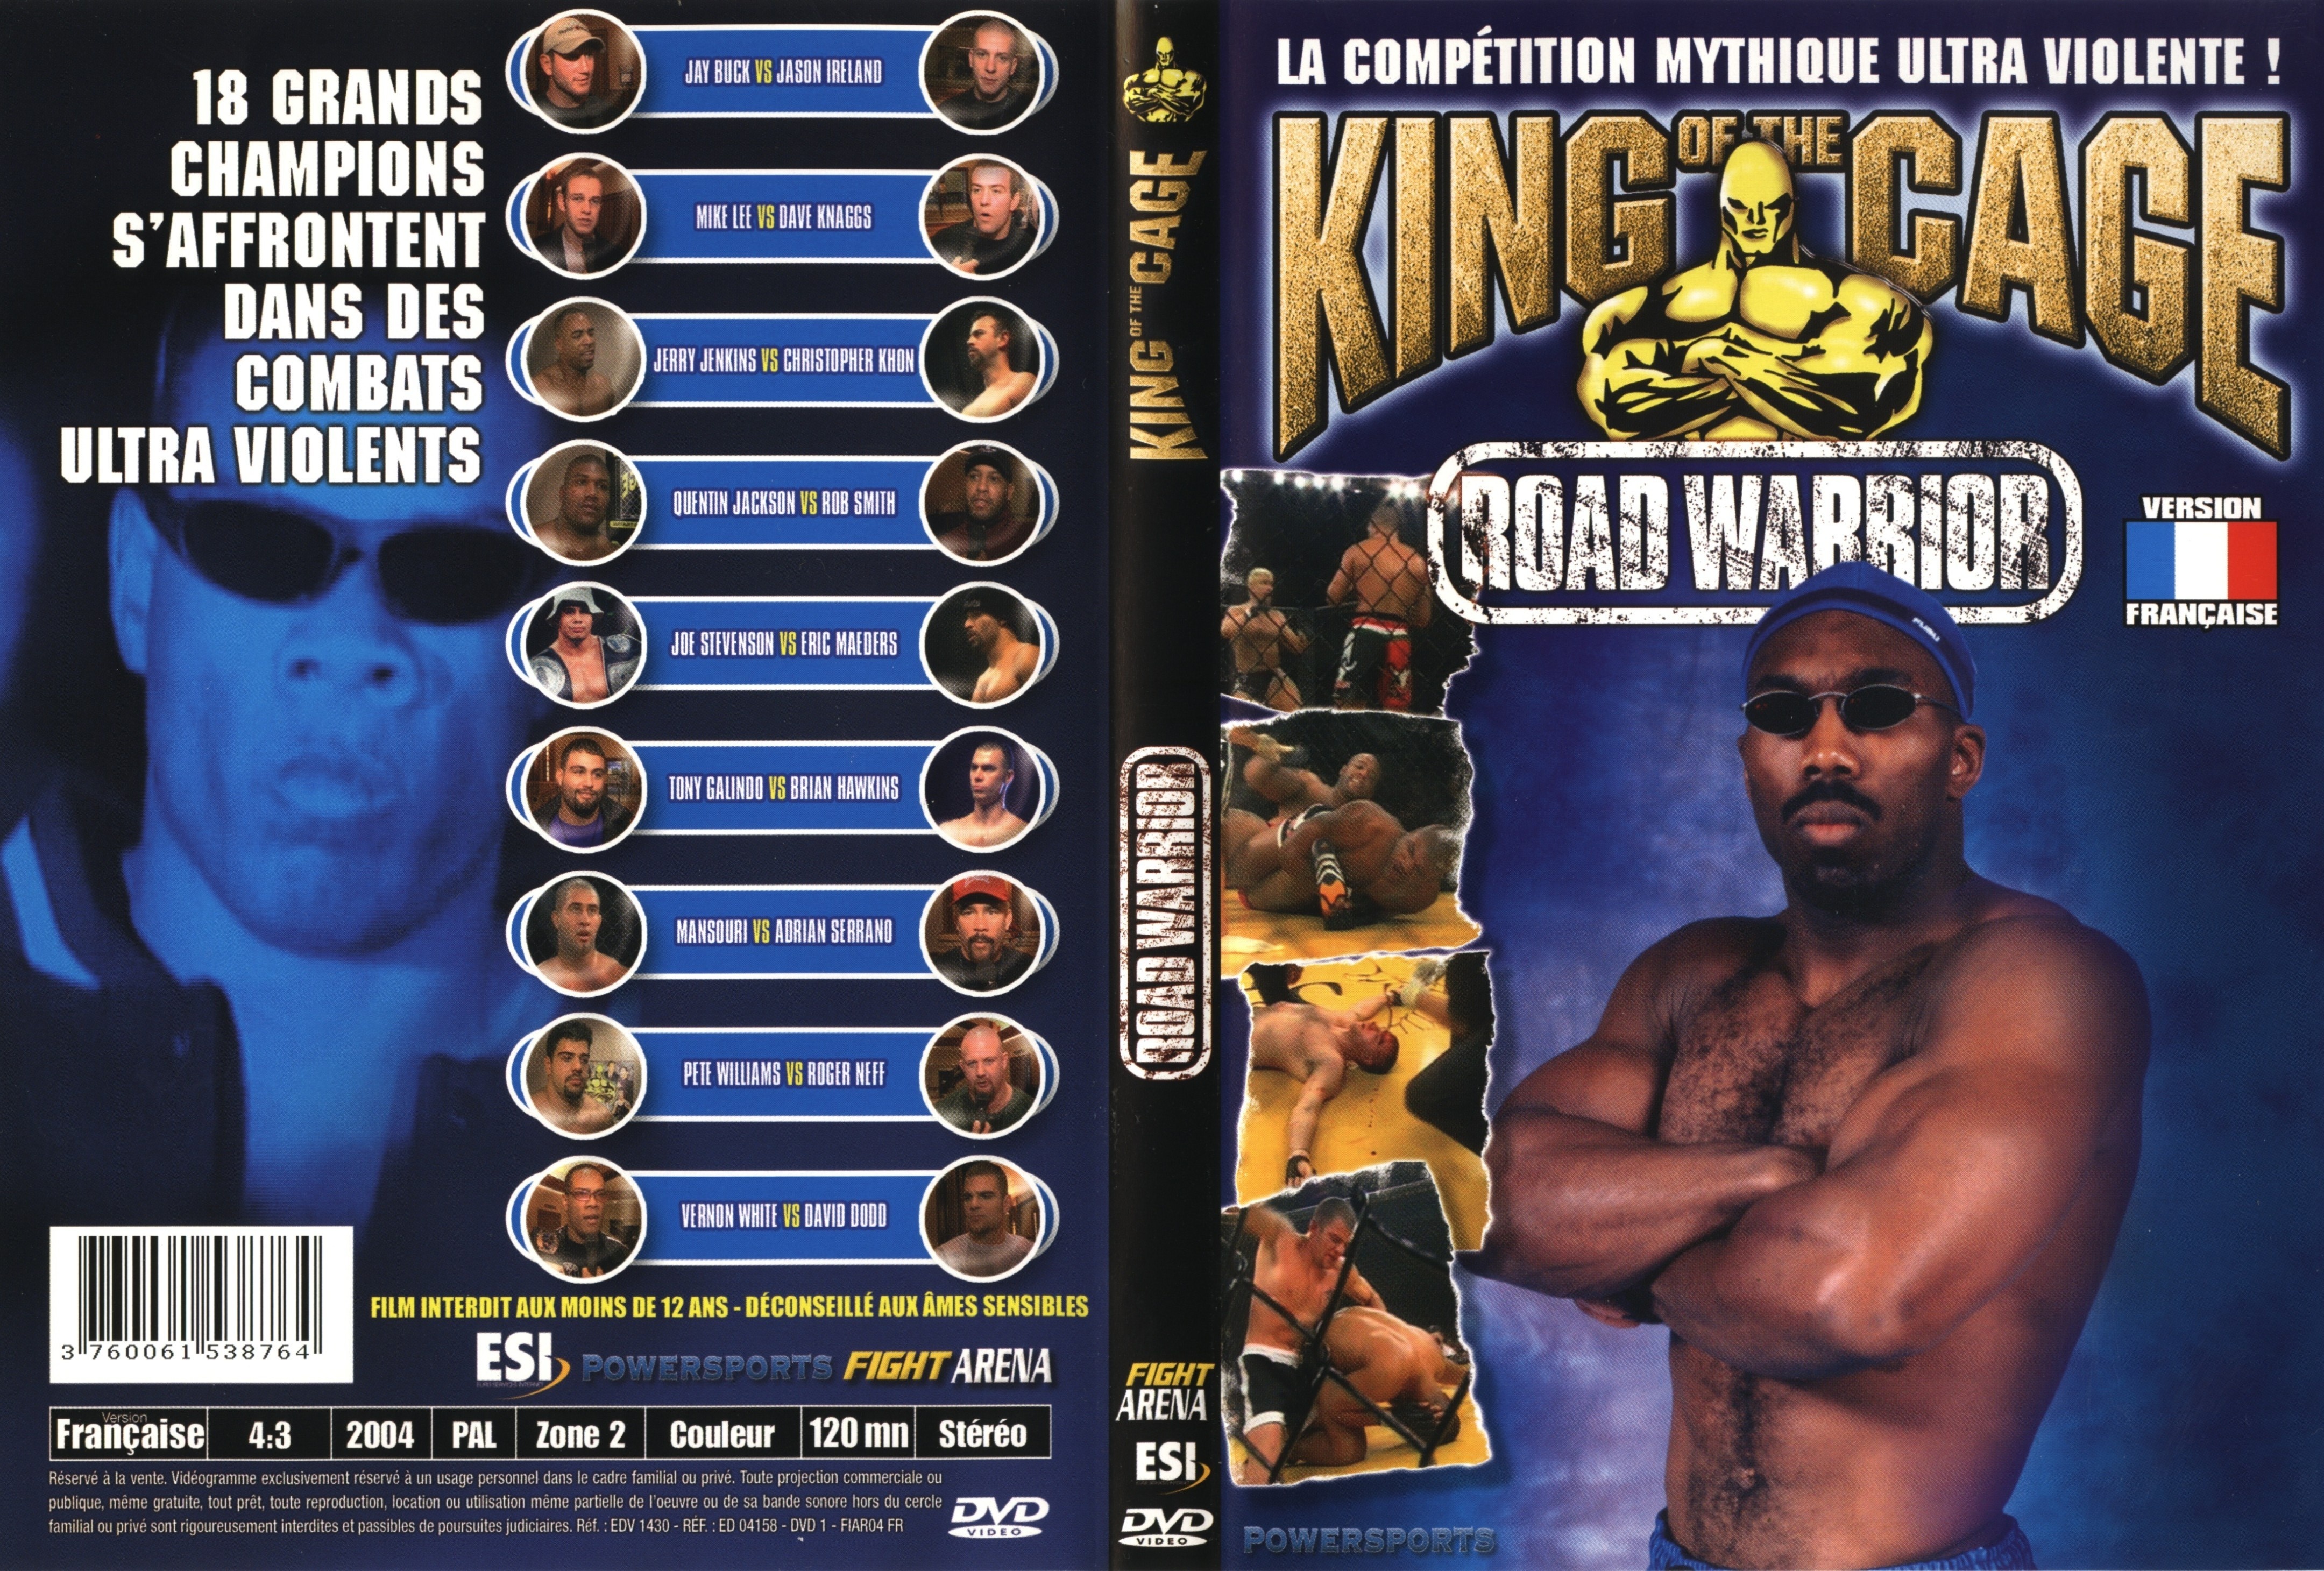 Jaquette DVD King of the cage road warrior